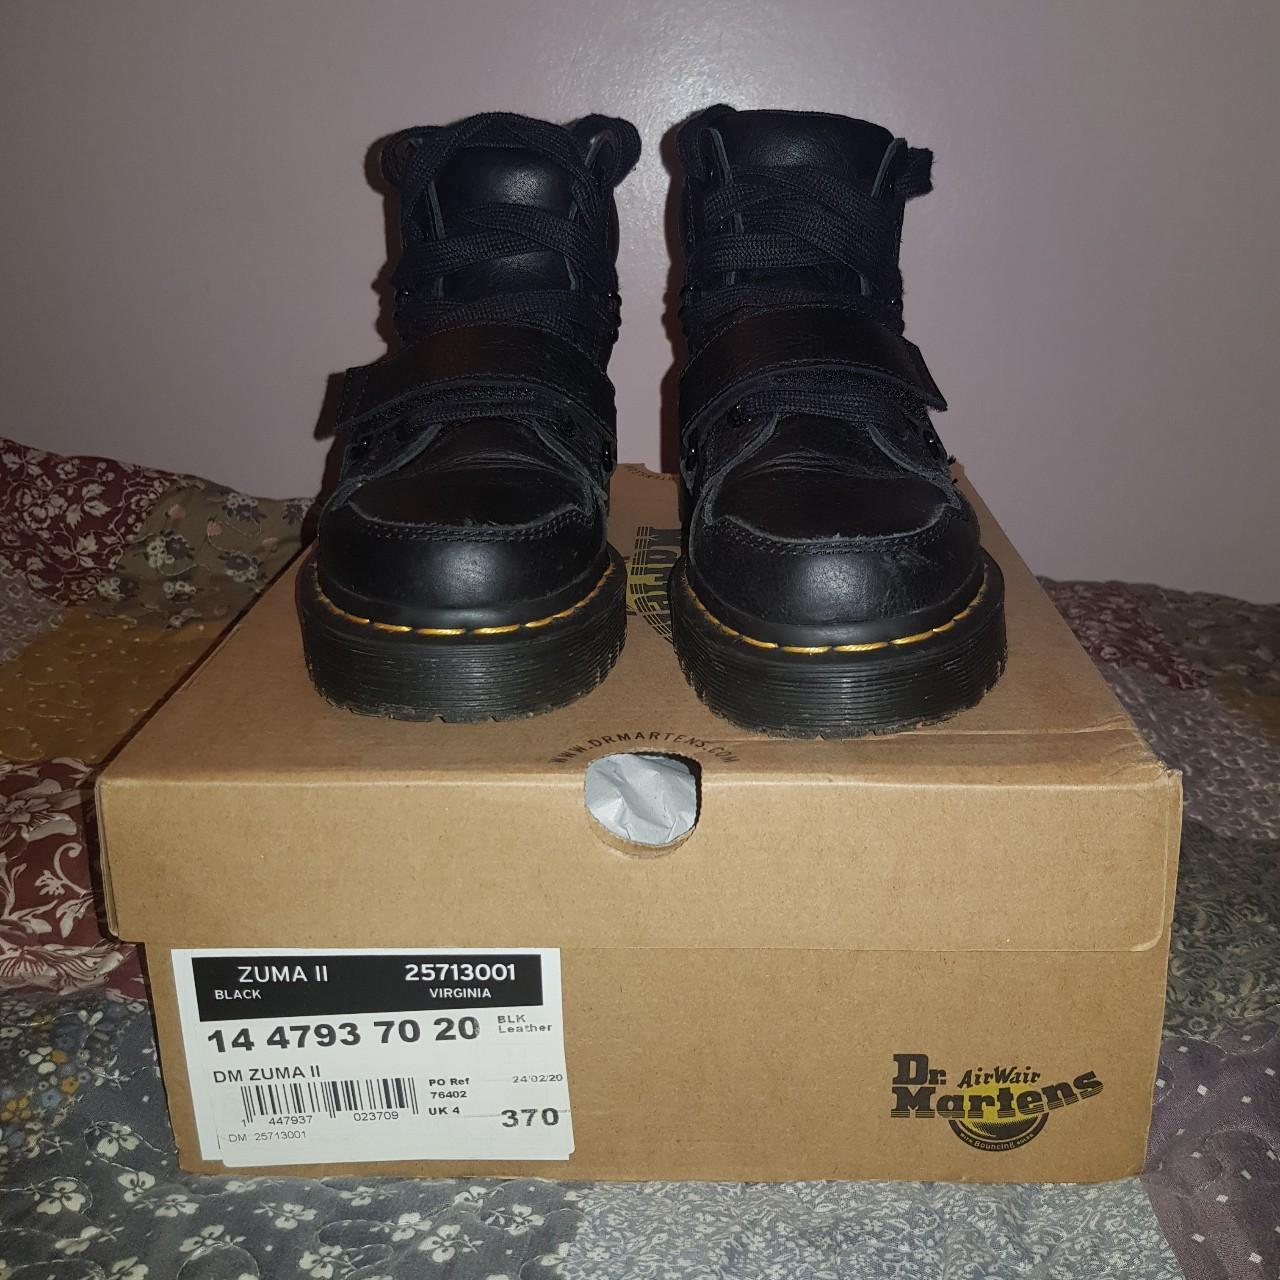 DR MARTENS Zuma II black leather boots Wore them for... - Depop